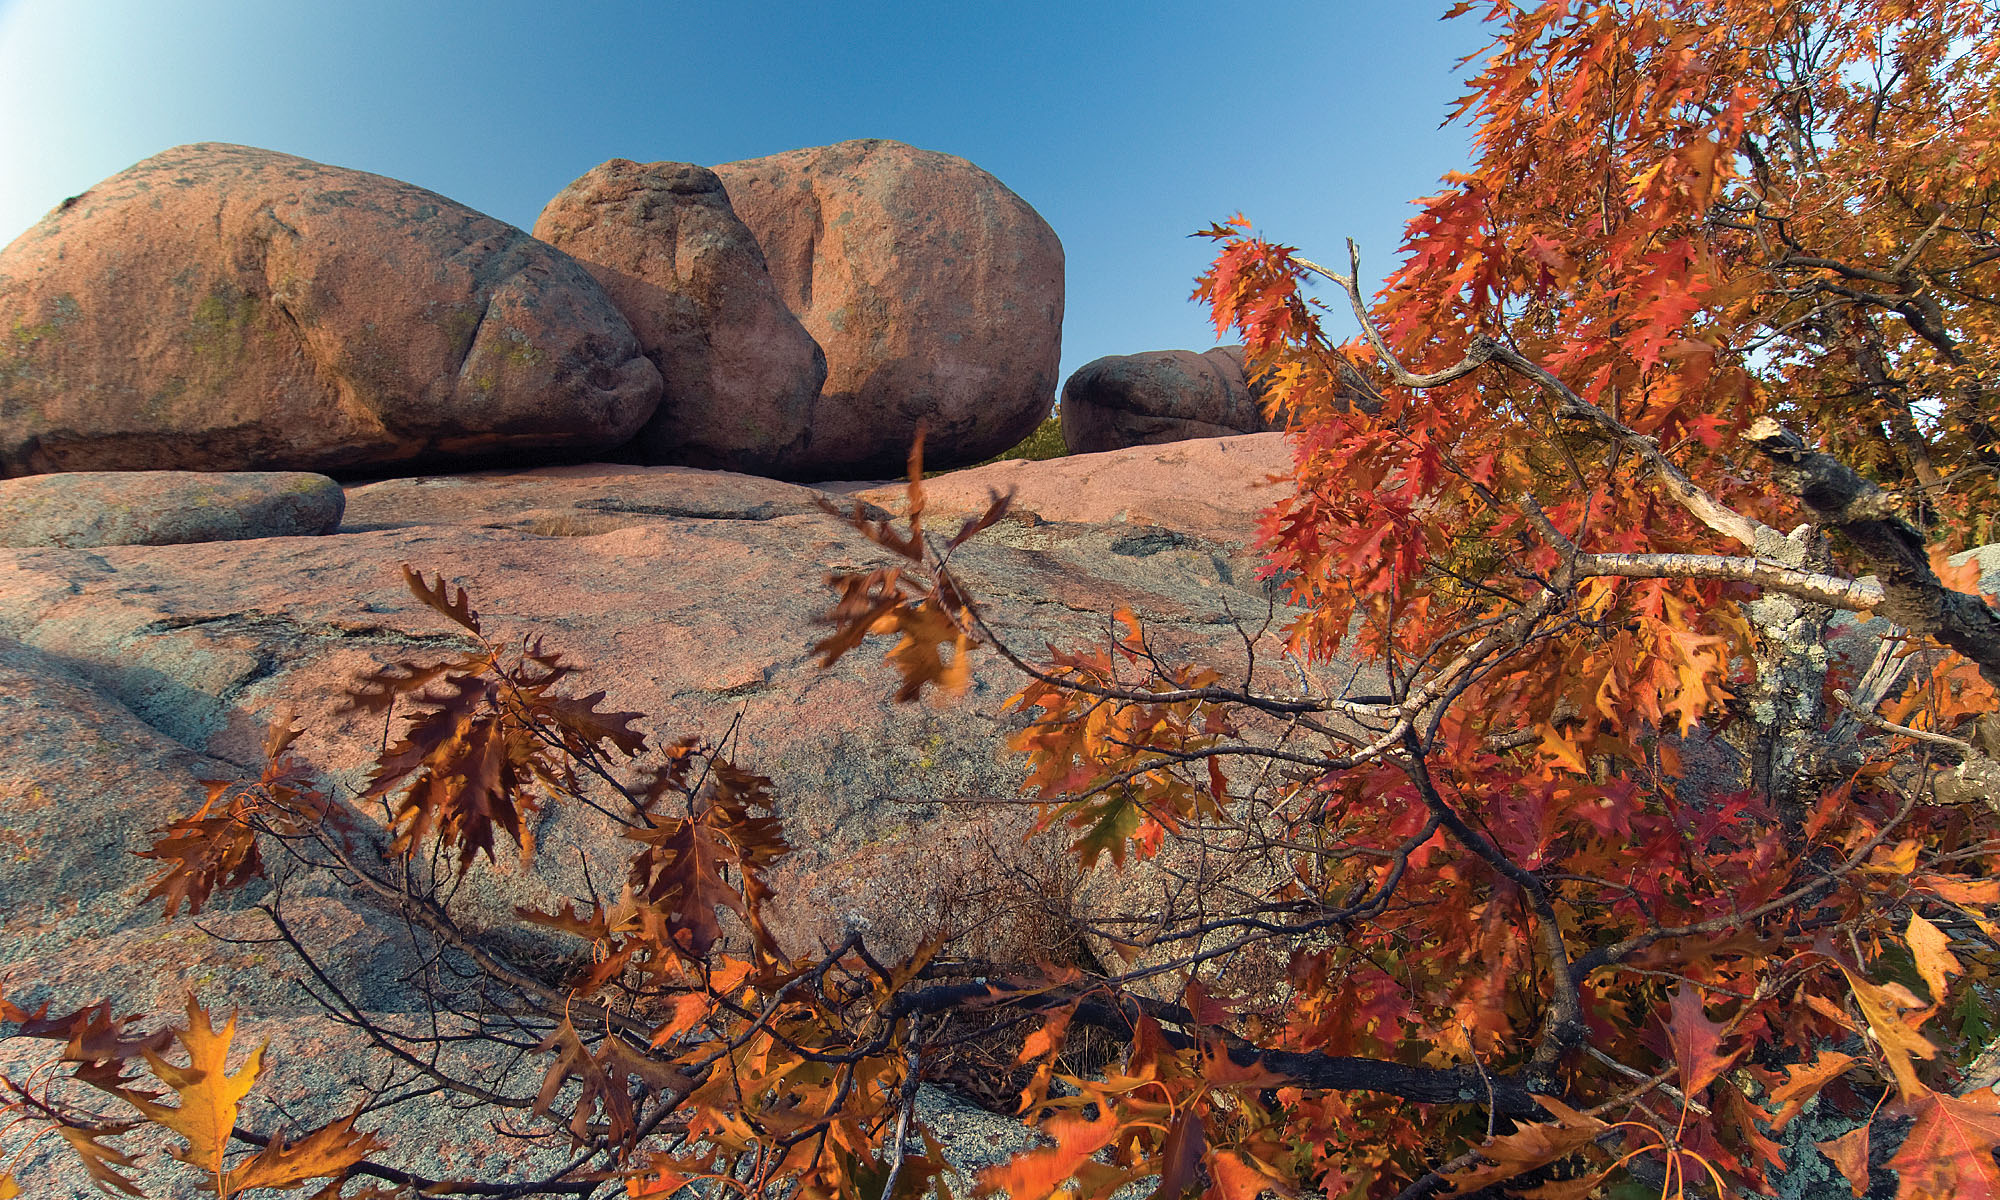 giant boulders on top of a rock bed with fall color trees in the foreground